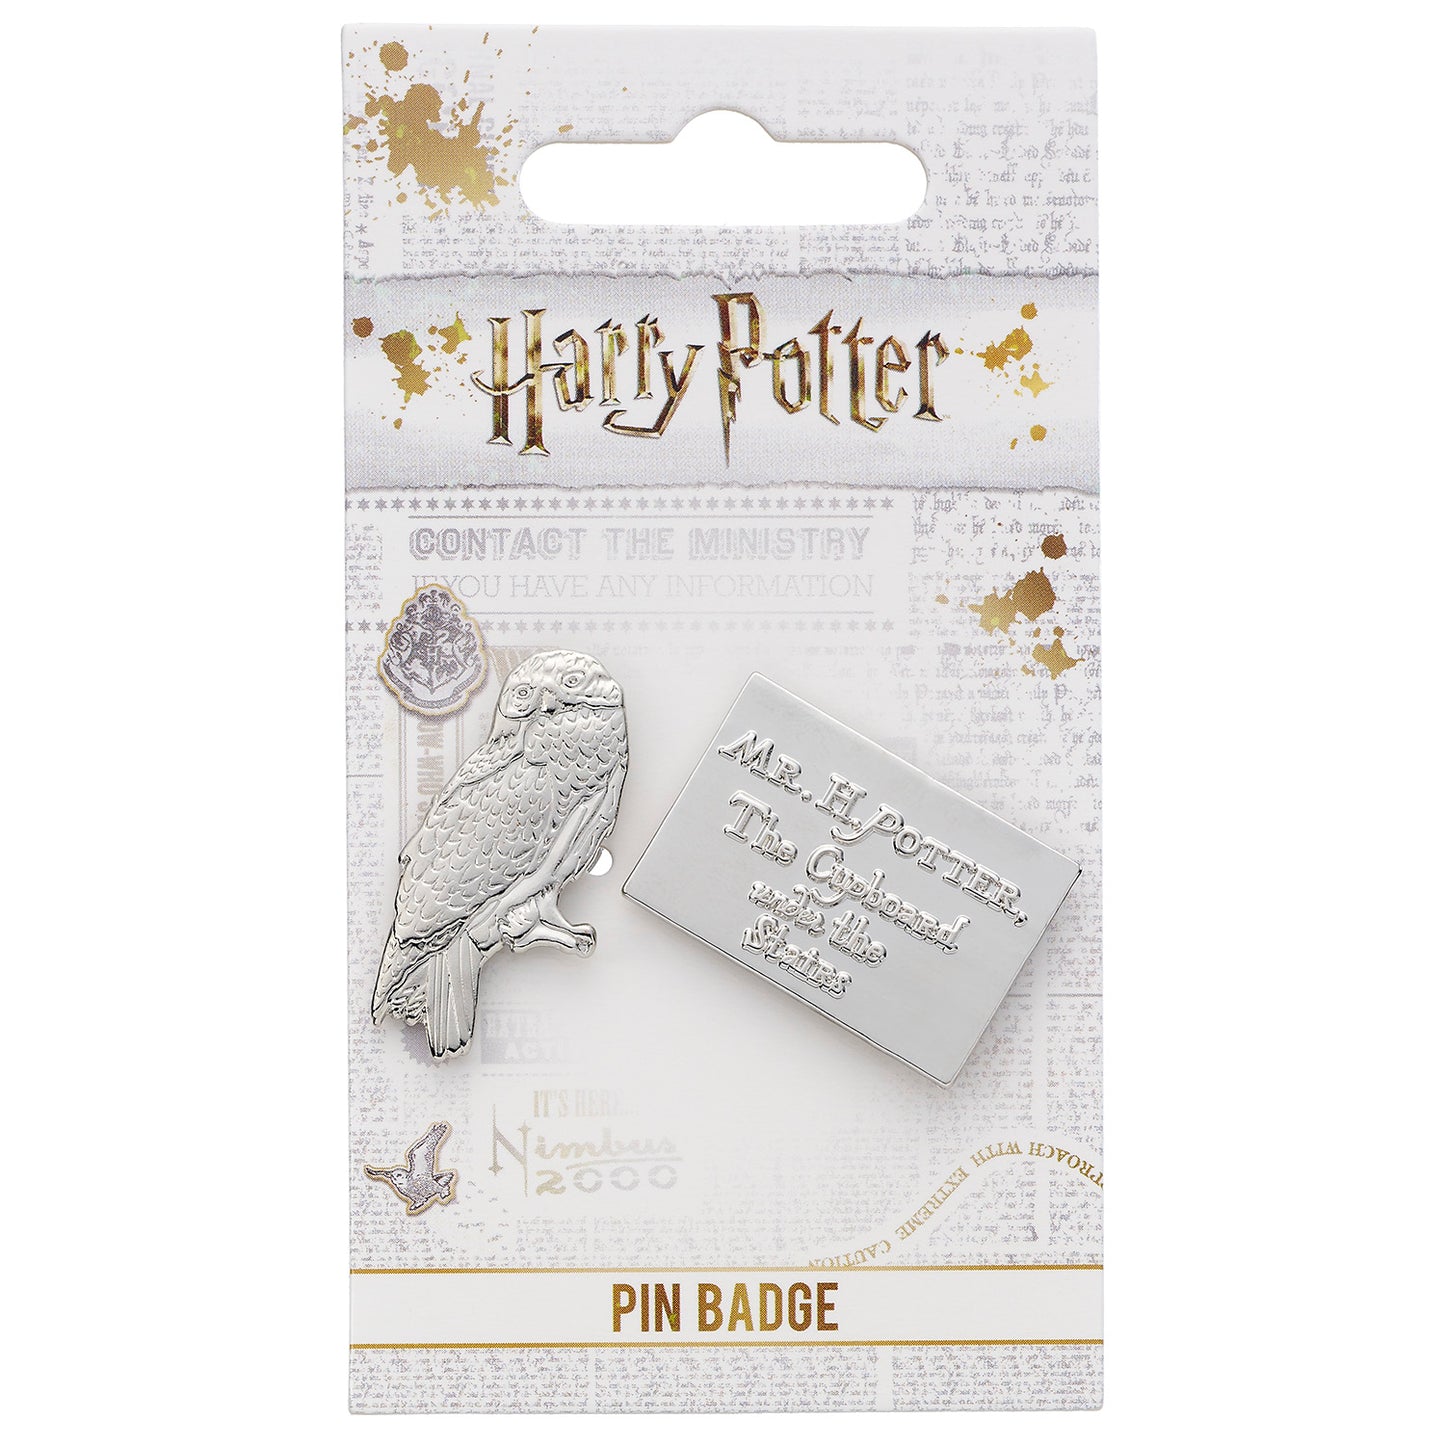 Harry Potter Hedwig the Owl and Acceptance Letter Pin Badge - Silver